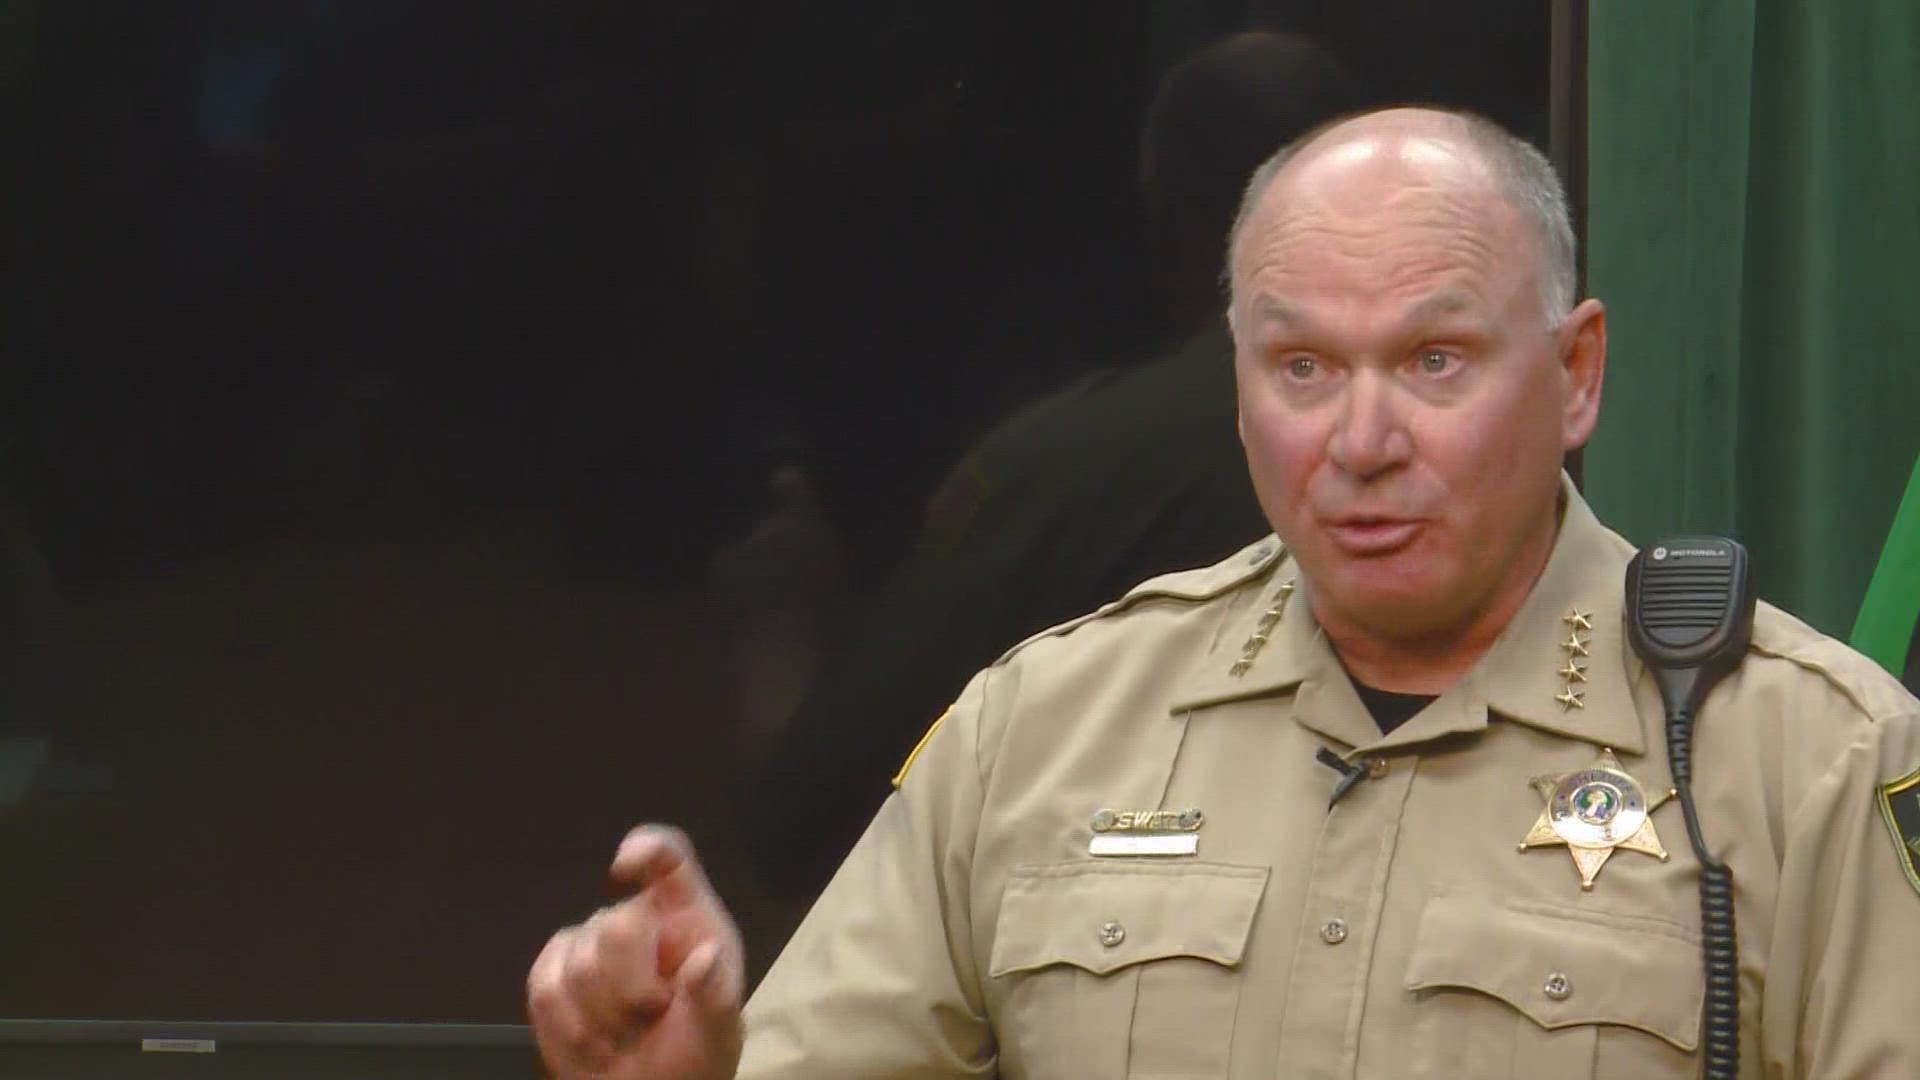 Spokane County Sheriff Ozzie Knezovich talked about his plan to clear out a homeless camp along I-90 and Freya in Spokane after sending a letter to WSDOT.